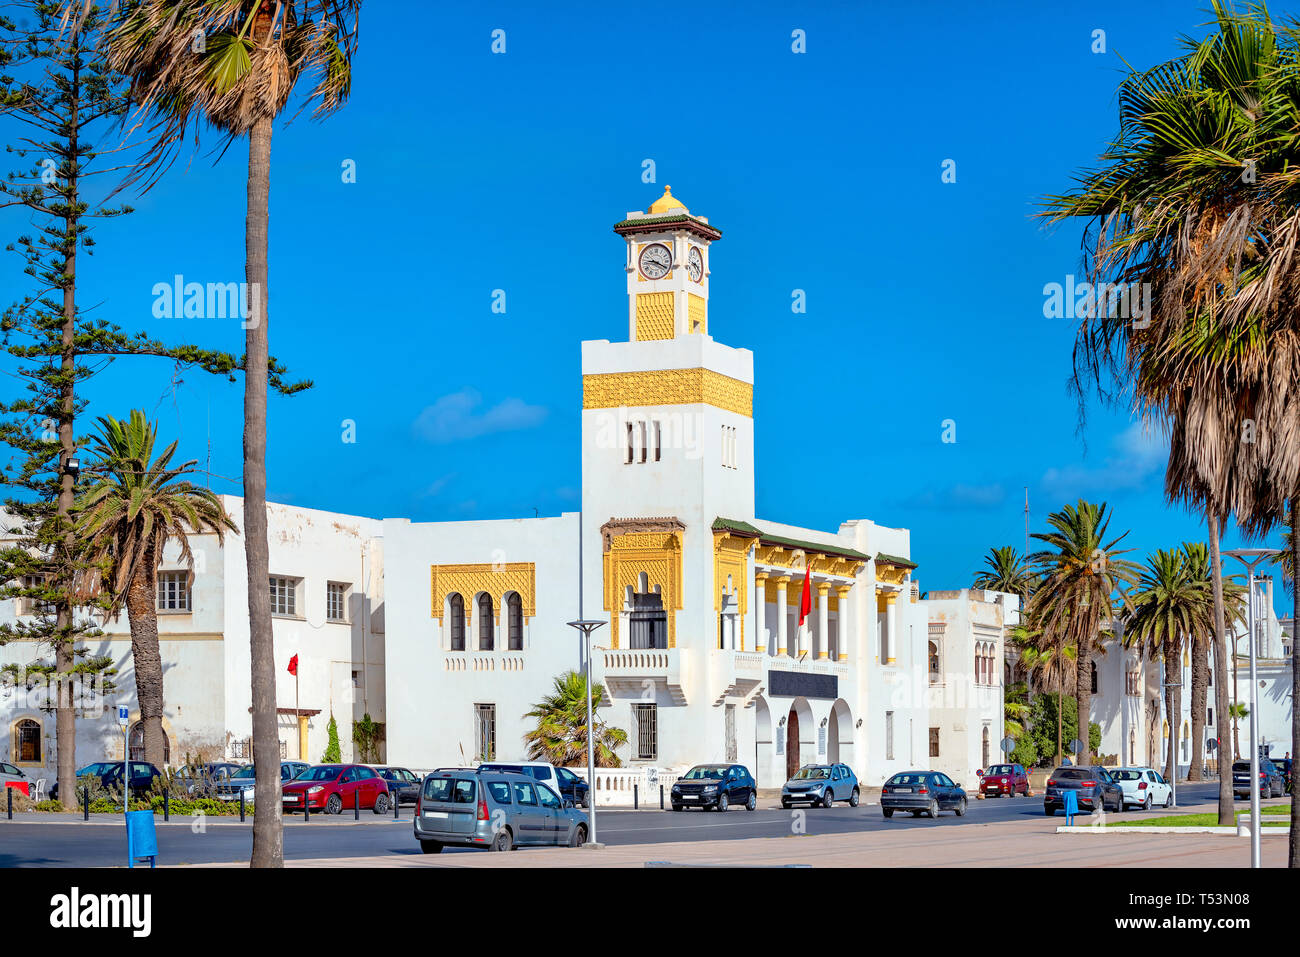 Street with urban clock tower in Essaouira. Morocco, North Africa Stock Photo